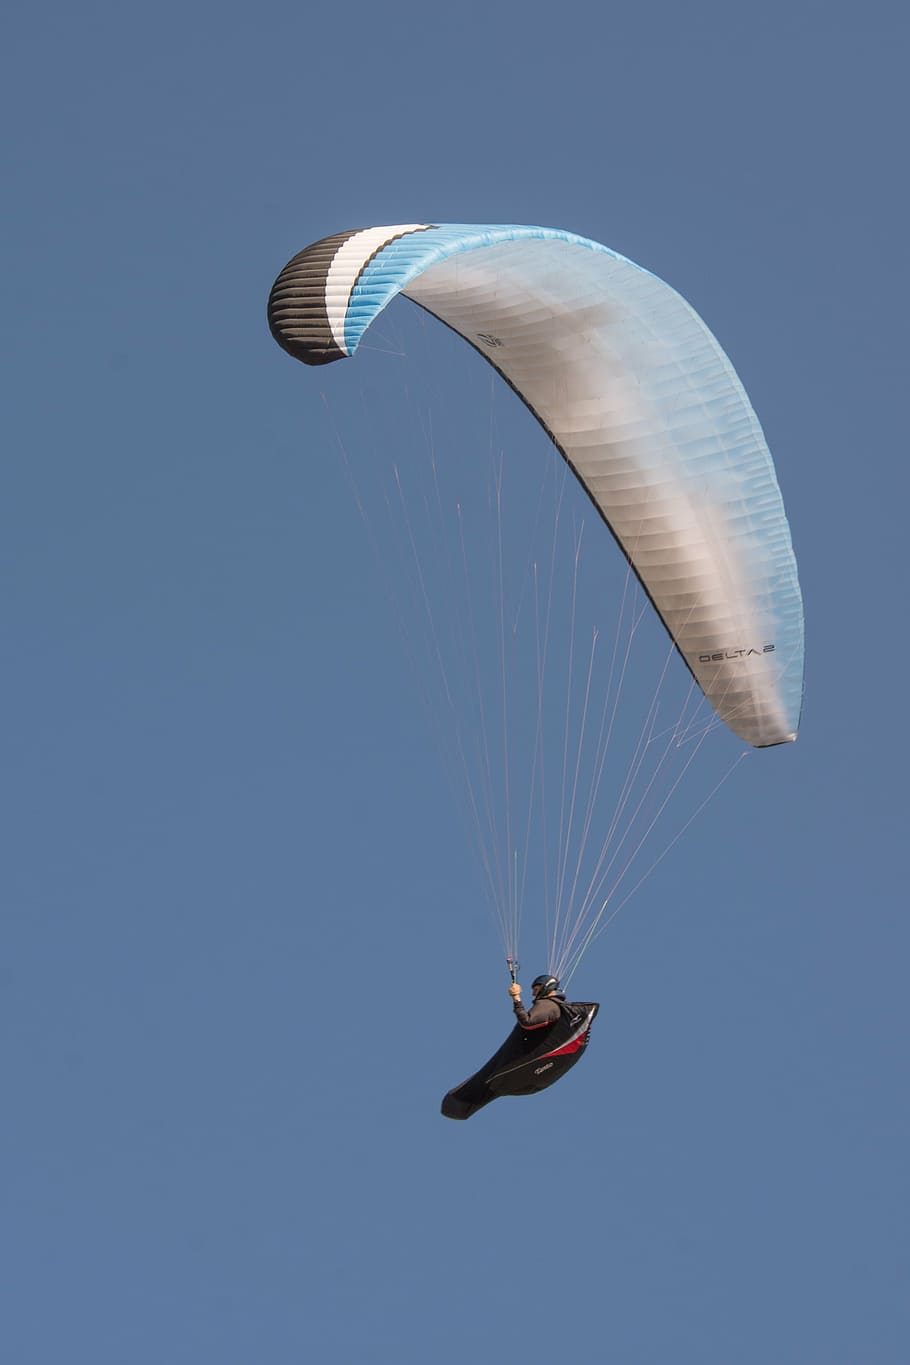 Paraplaner, Fly, Flying, Sky, Sport, Extreme, Paraglider, - Powered Paragliding - HD Wallpaper 